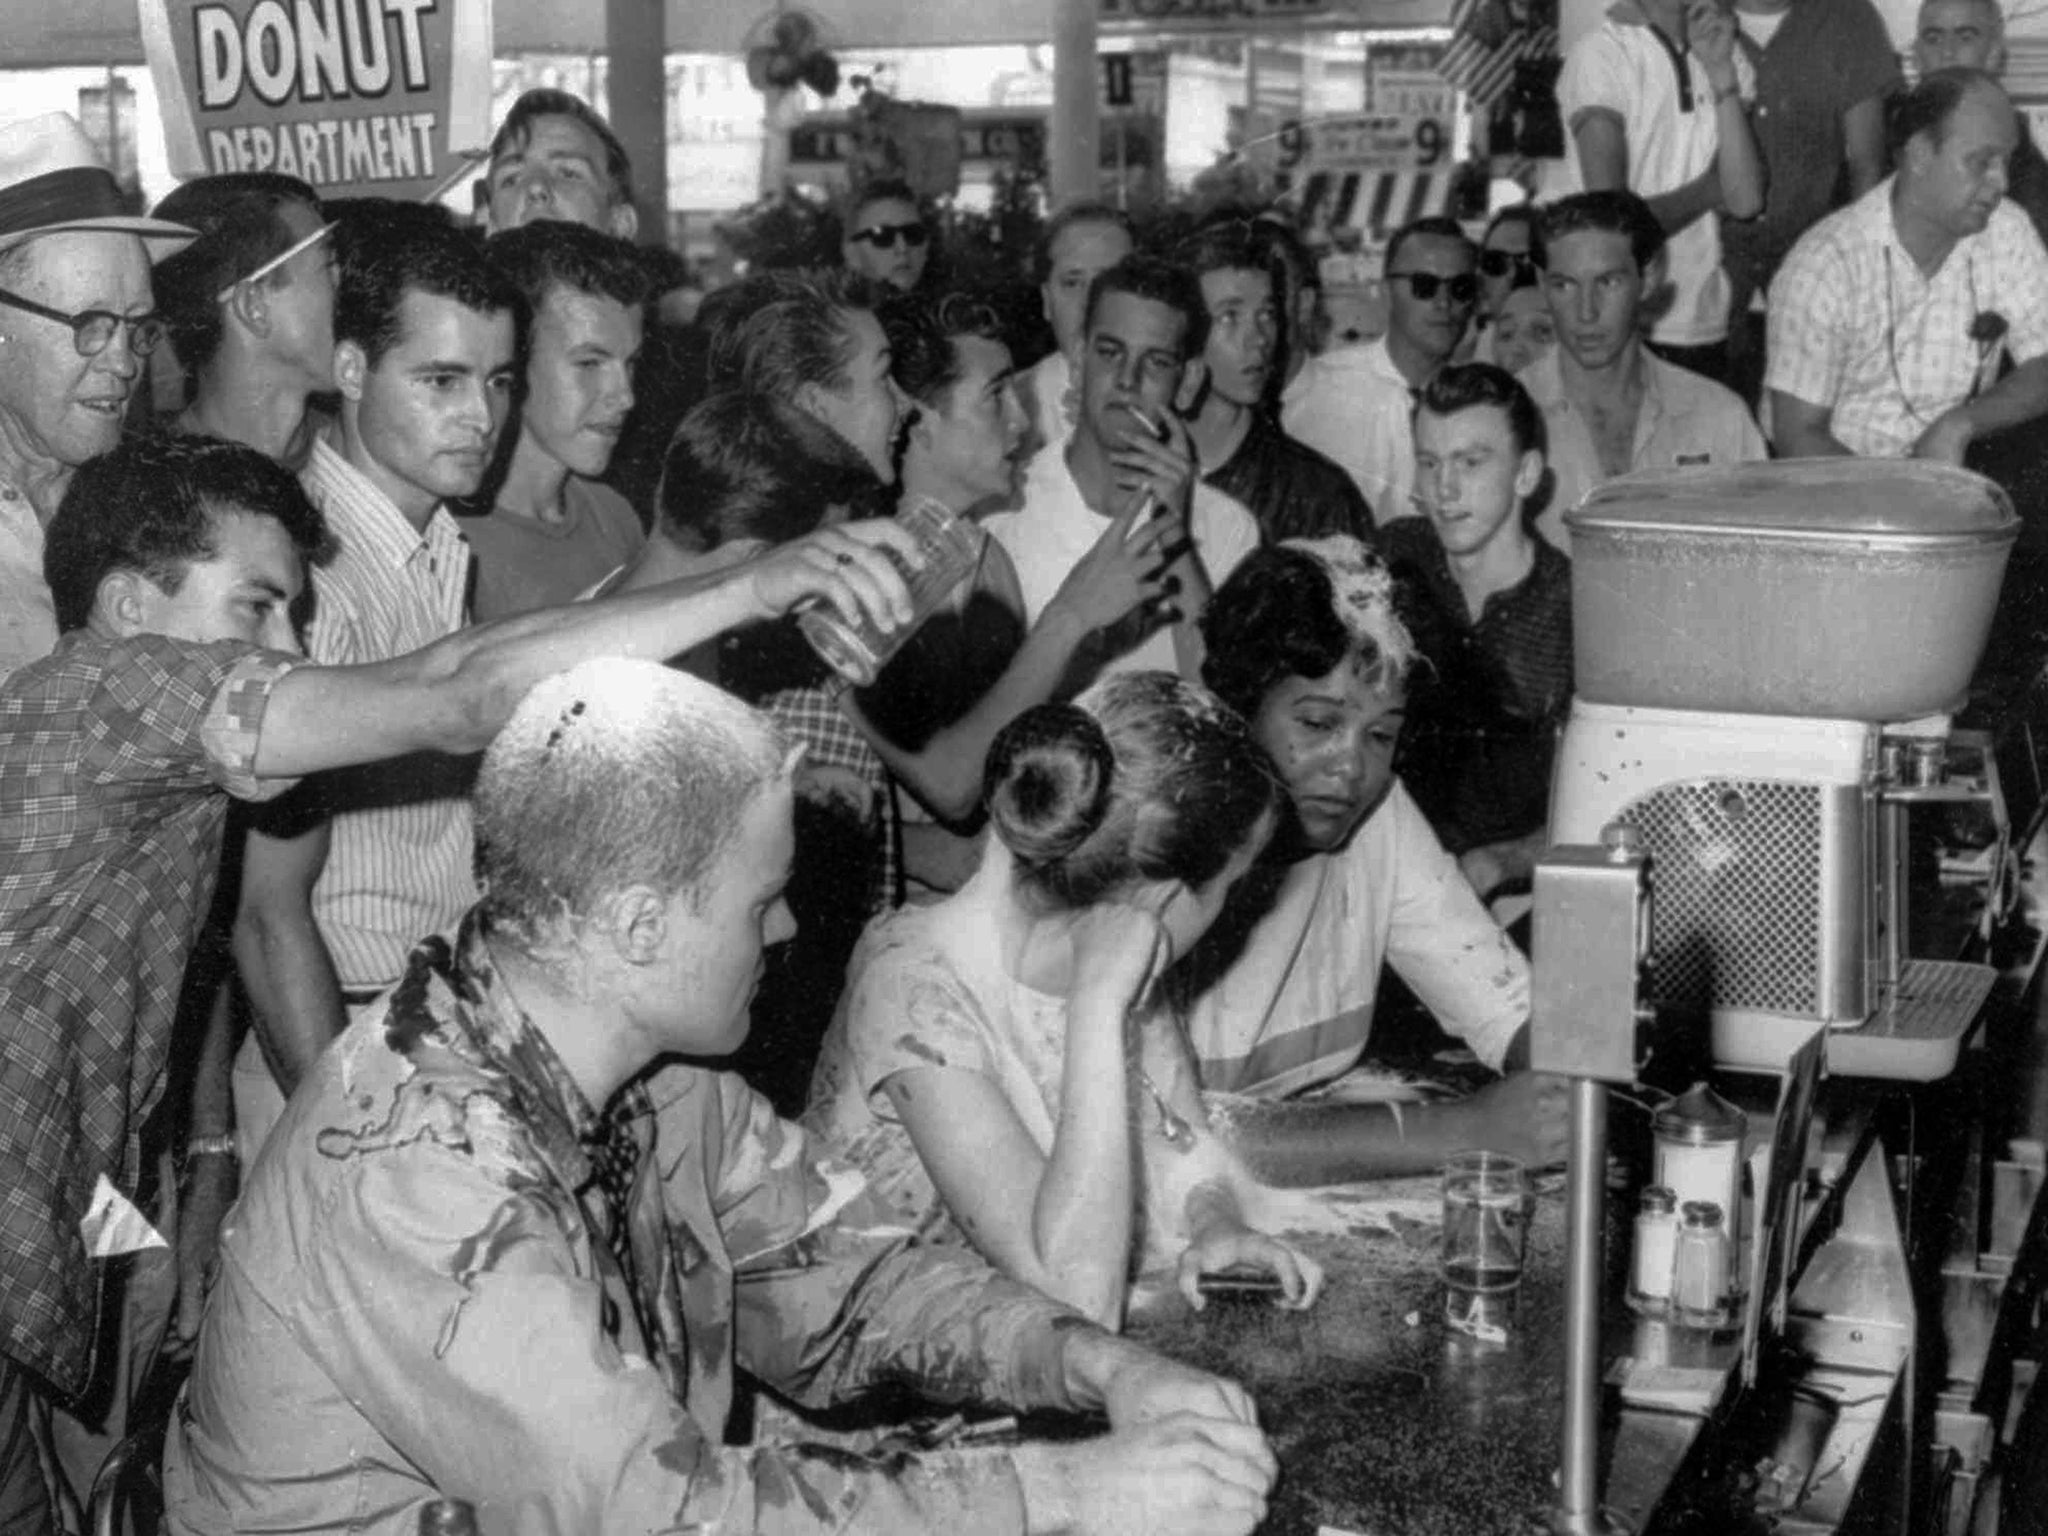 Moody, seated far right, and fellow protestors face a hostile crowd during a sit-in protest against segregation in Jackson, Mississippi in 1963